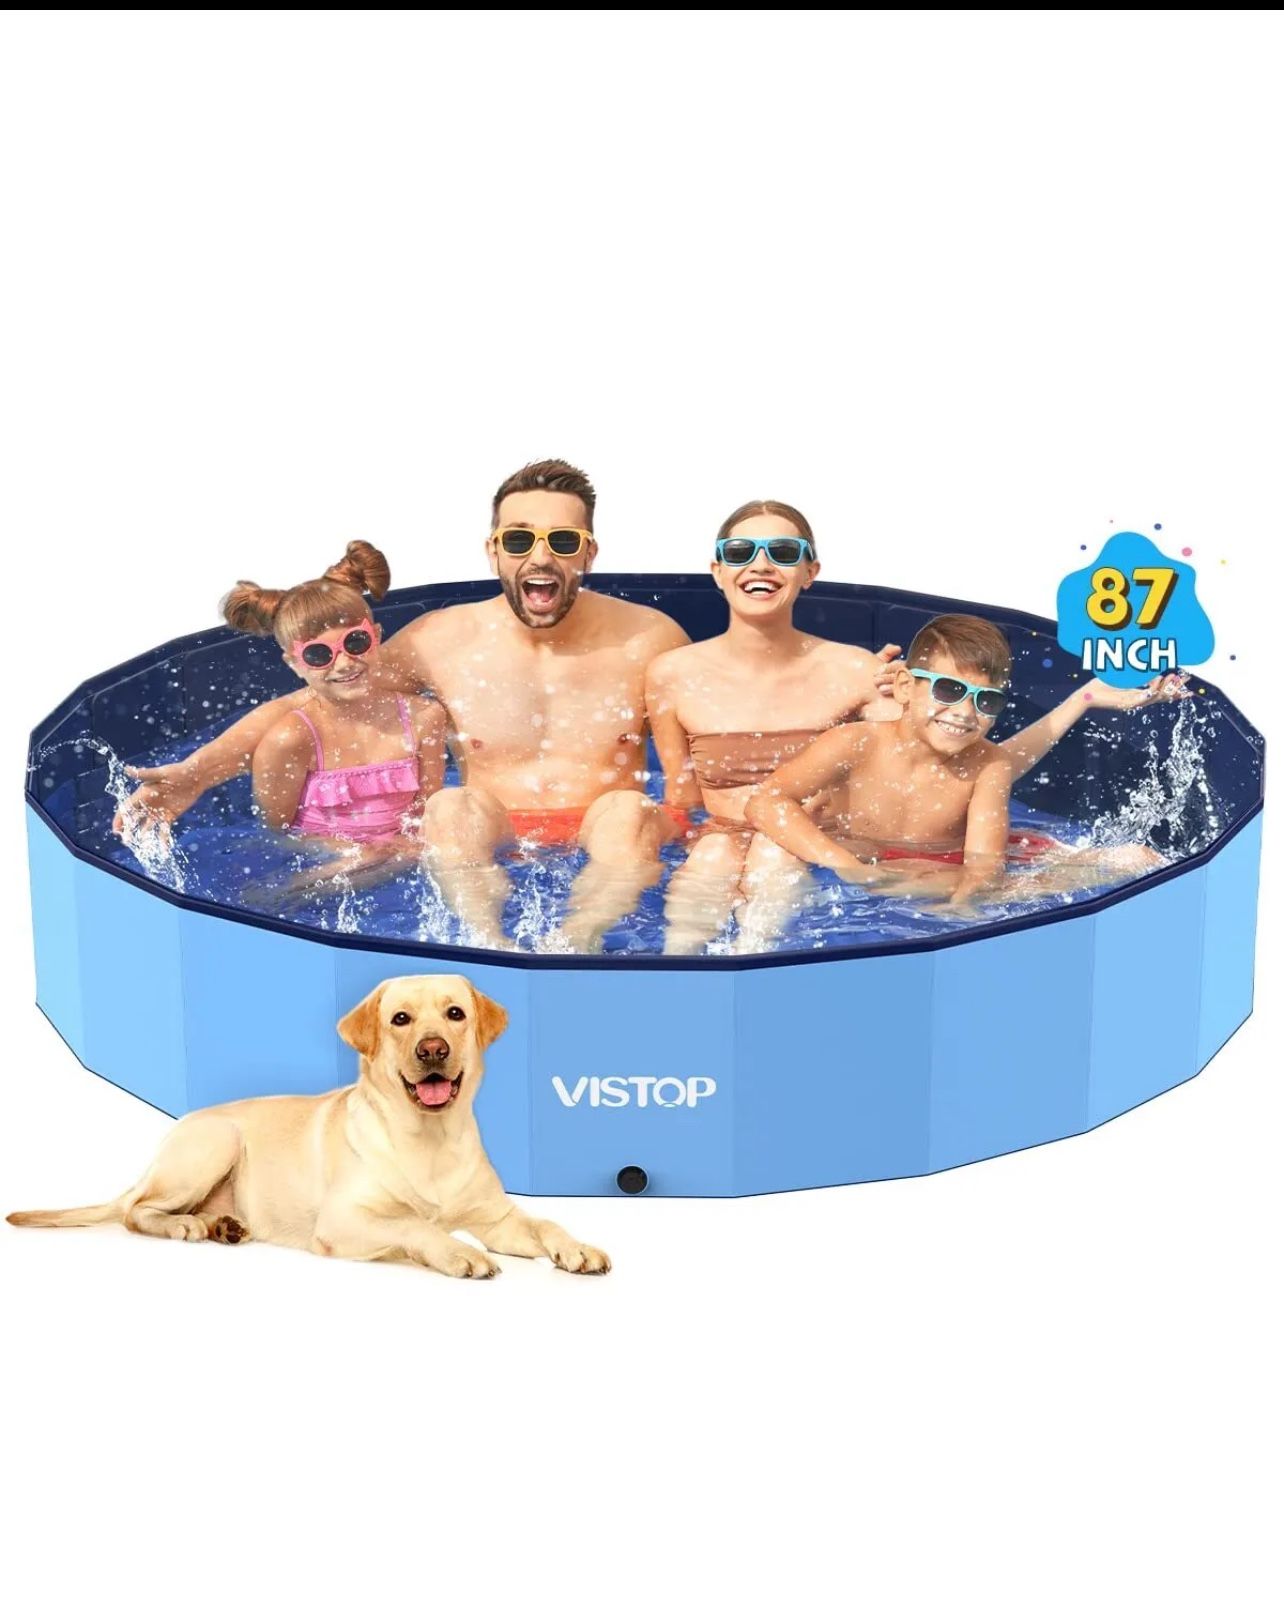 VISTOP XXXX Large Foldable Dog Pool, Hard Plastic Shell 87 inches